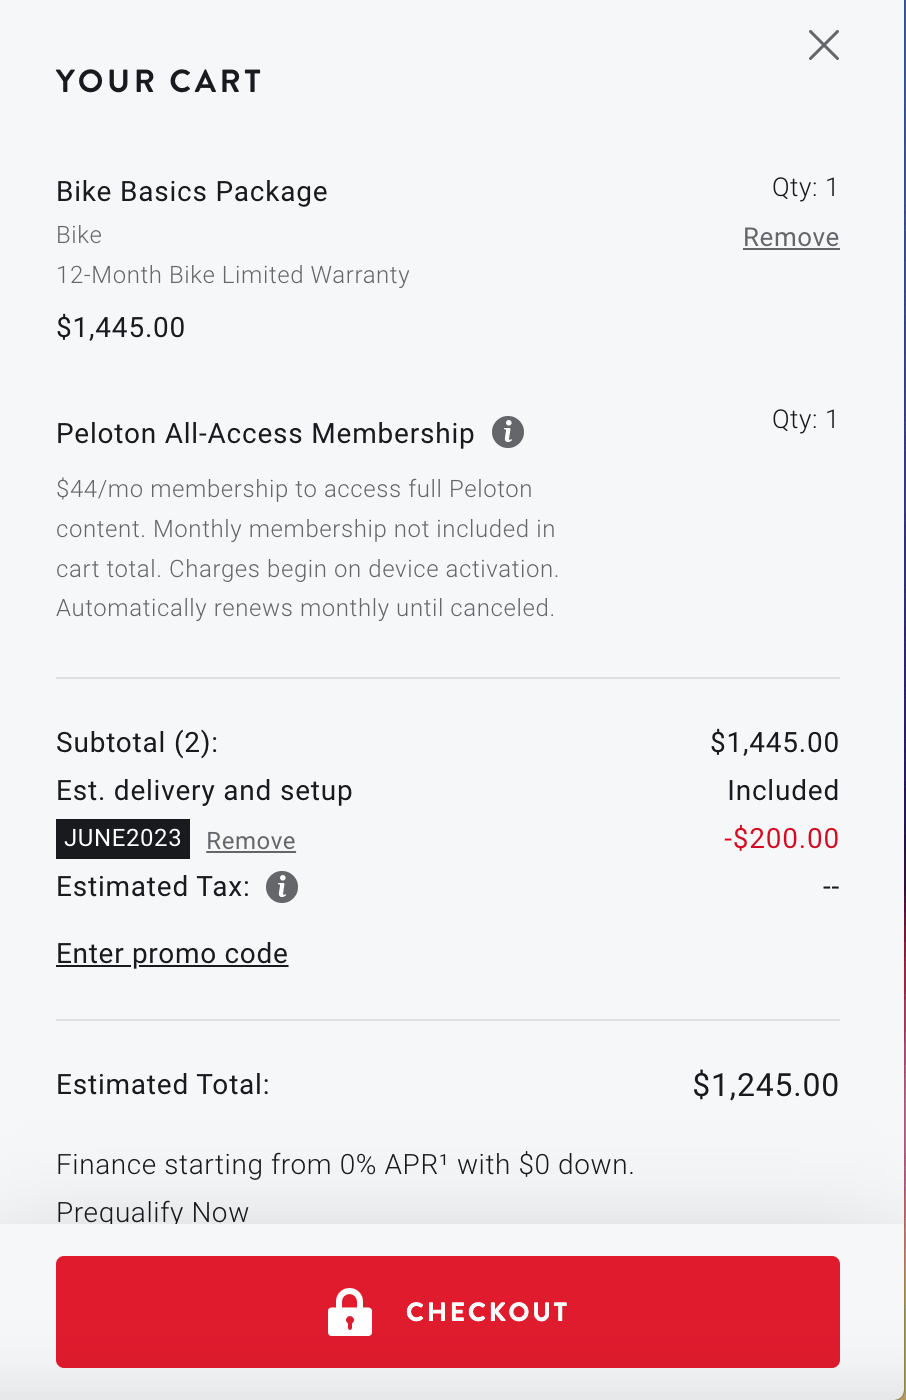 $200 discount applied in cart.